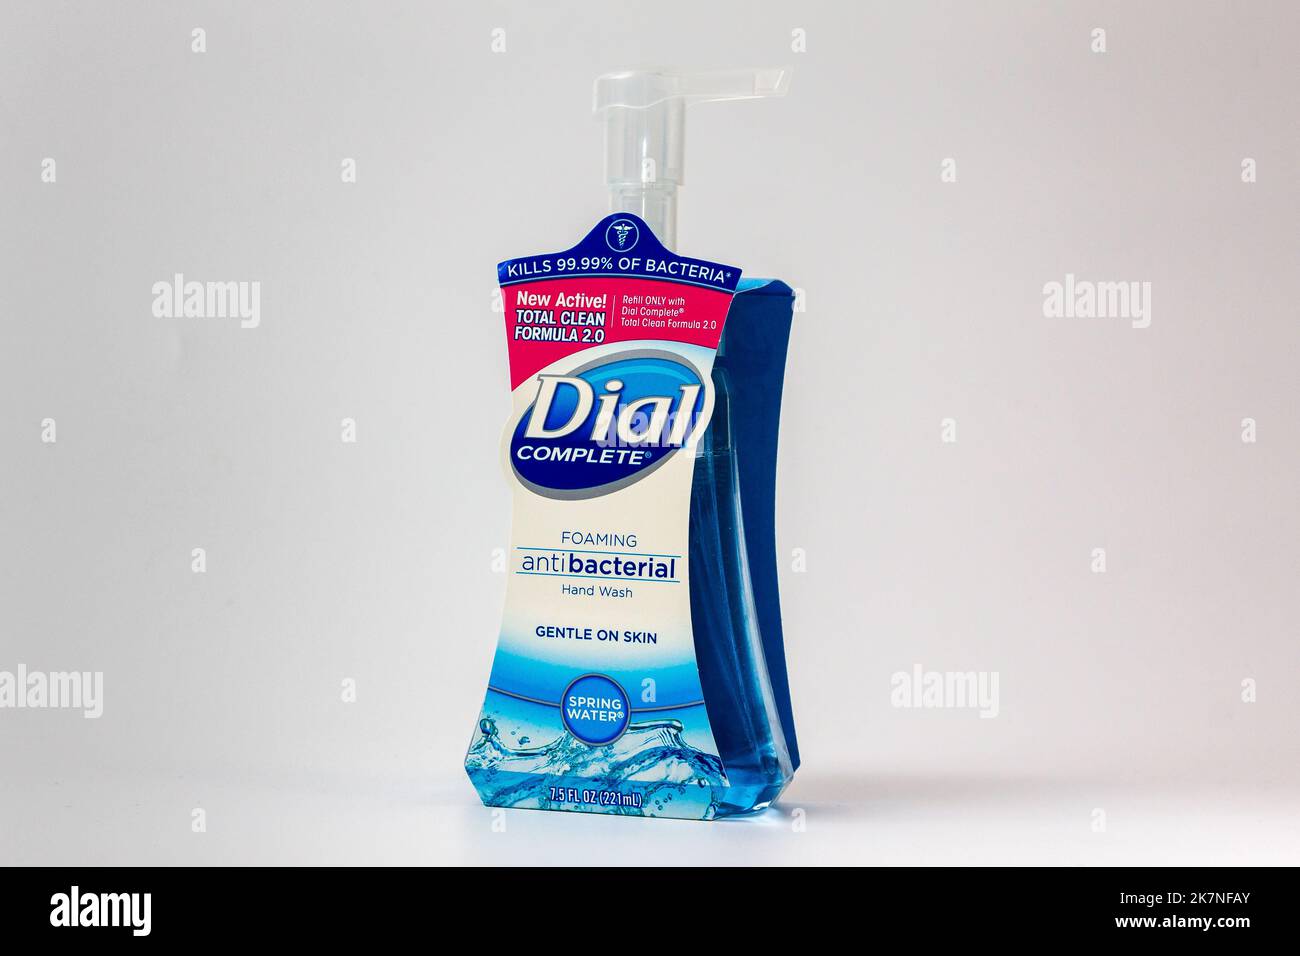 ST. PAUL, MN, USA - APRIL 5, 2021: Dial Complete liquid hand soap container and trademark logo. Stock Photo